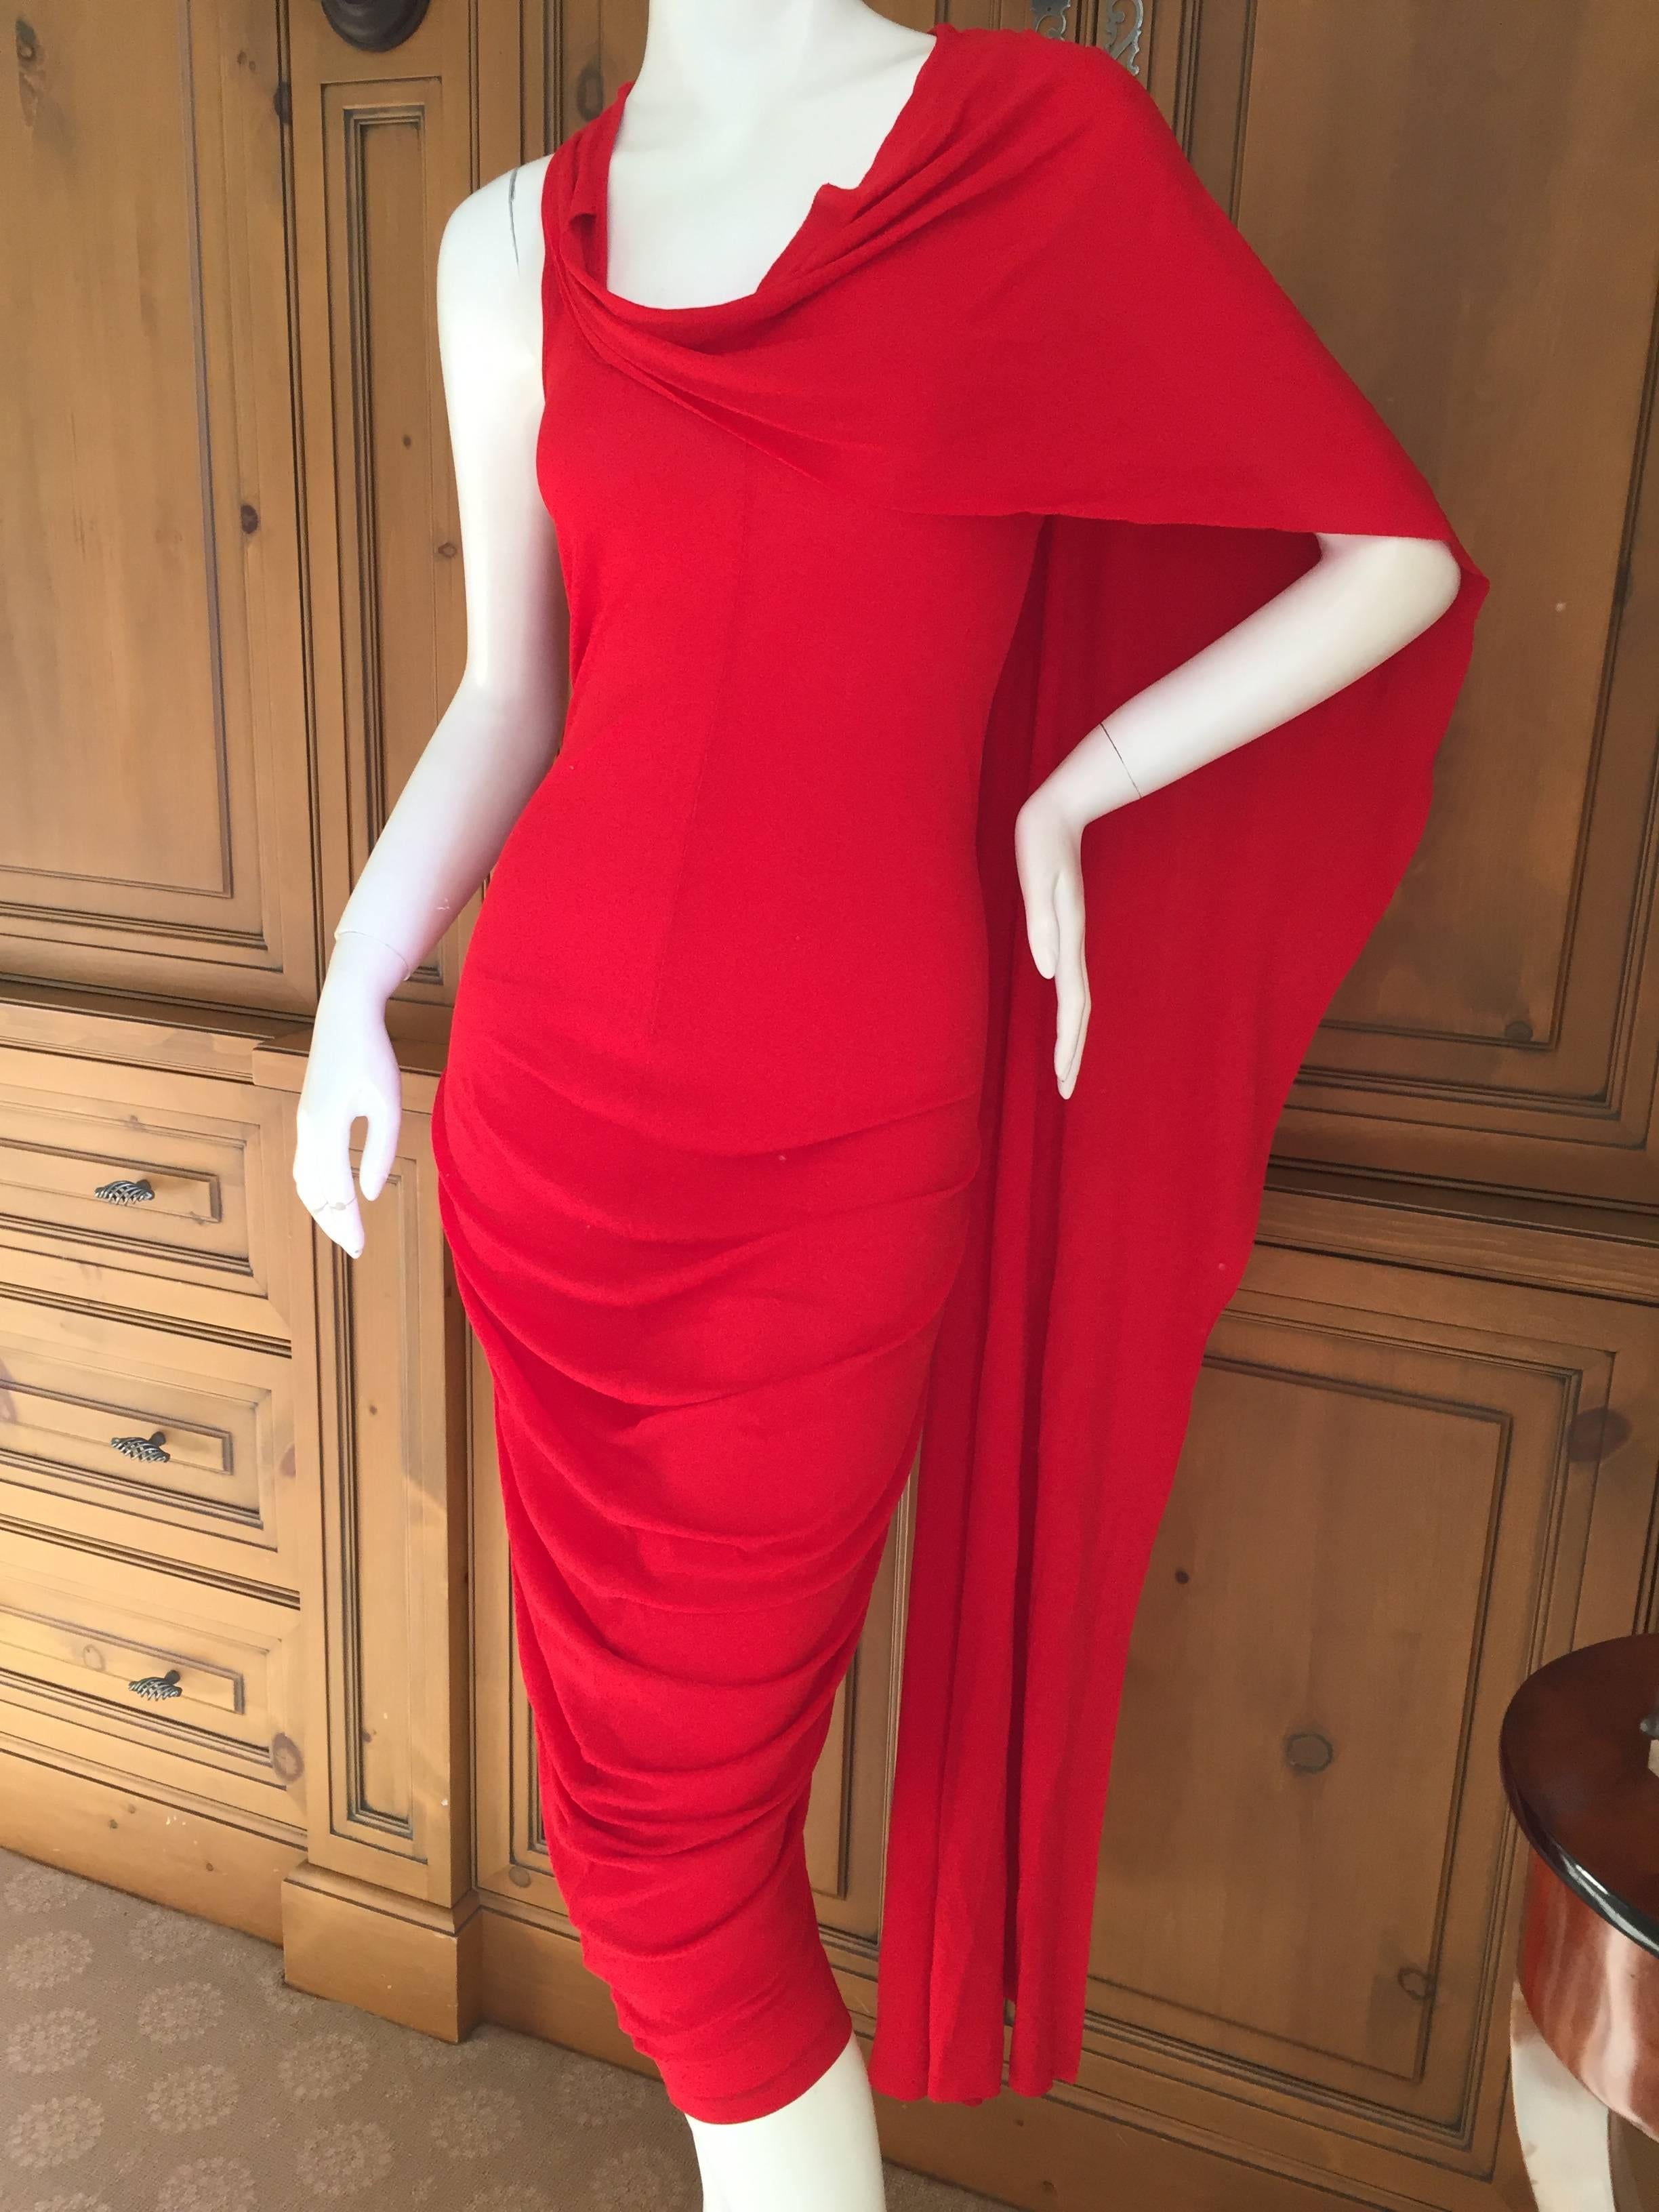 Alexander McQueen red jersey dress with attached shawl / wrap.

Can be worn multiple ways.

This is an unusual piece, I styled it a few different ways, not certain how it's supposed to go.
There is a lot of stretch in this 100% viscose